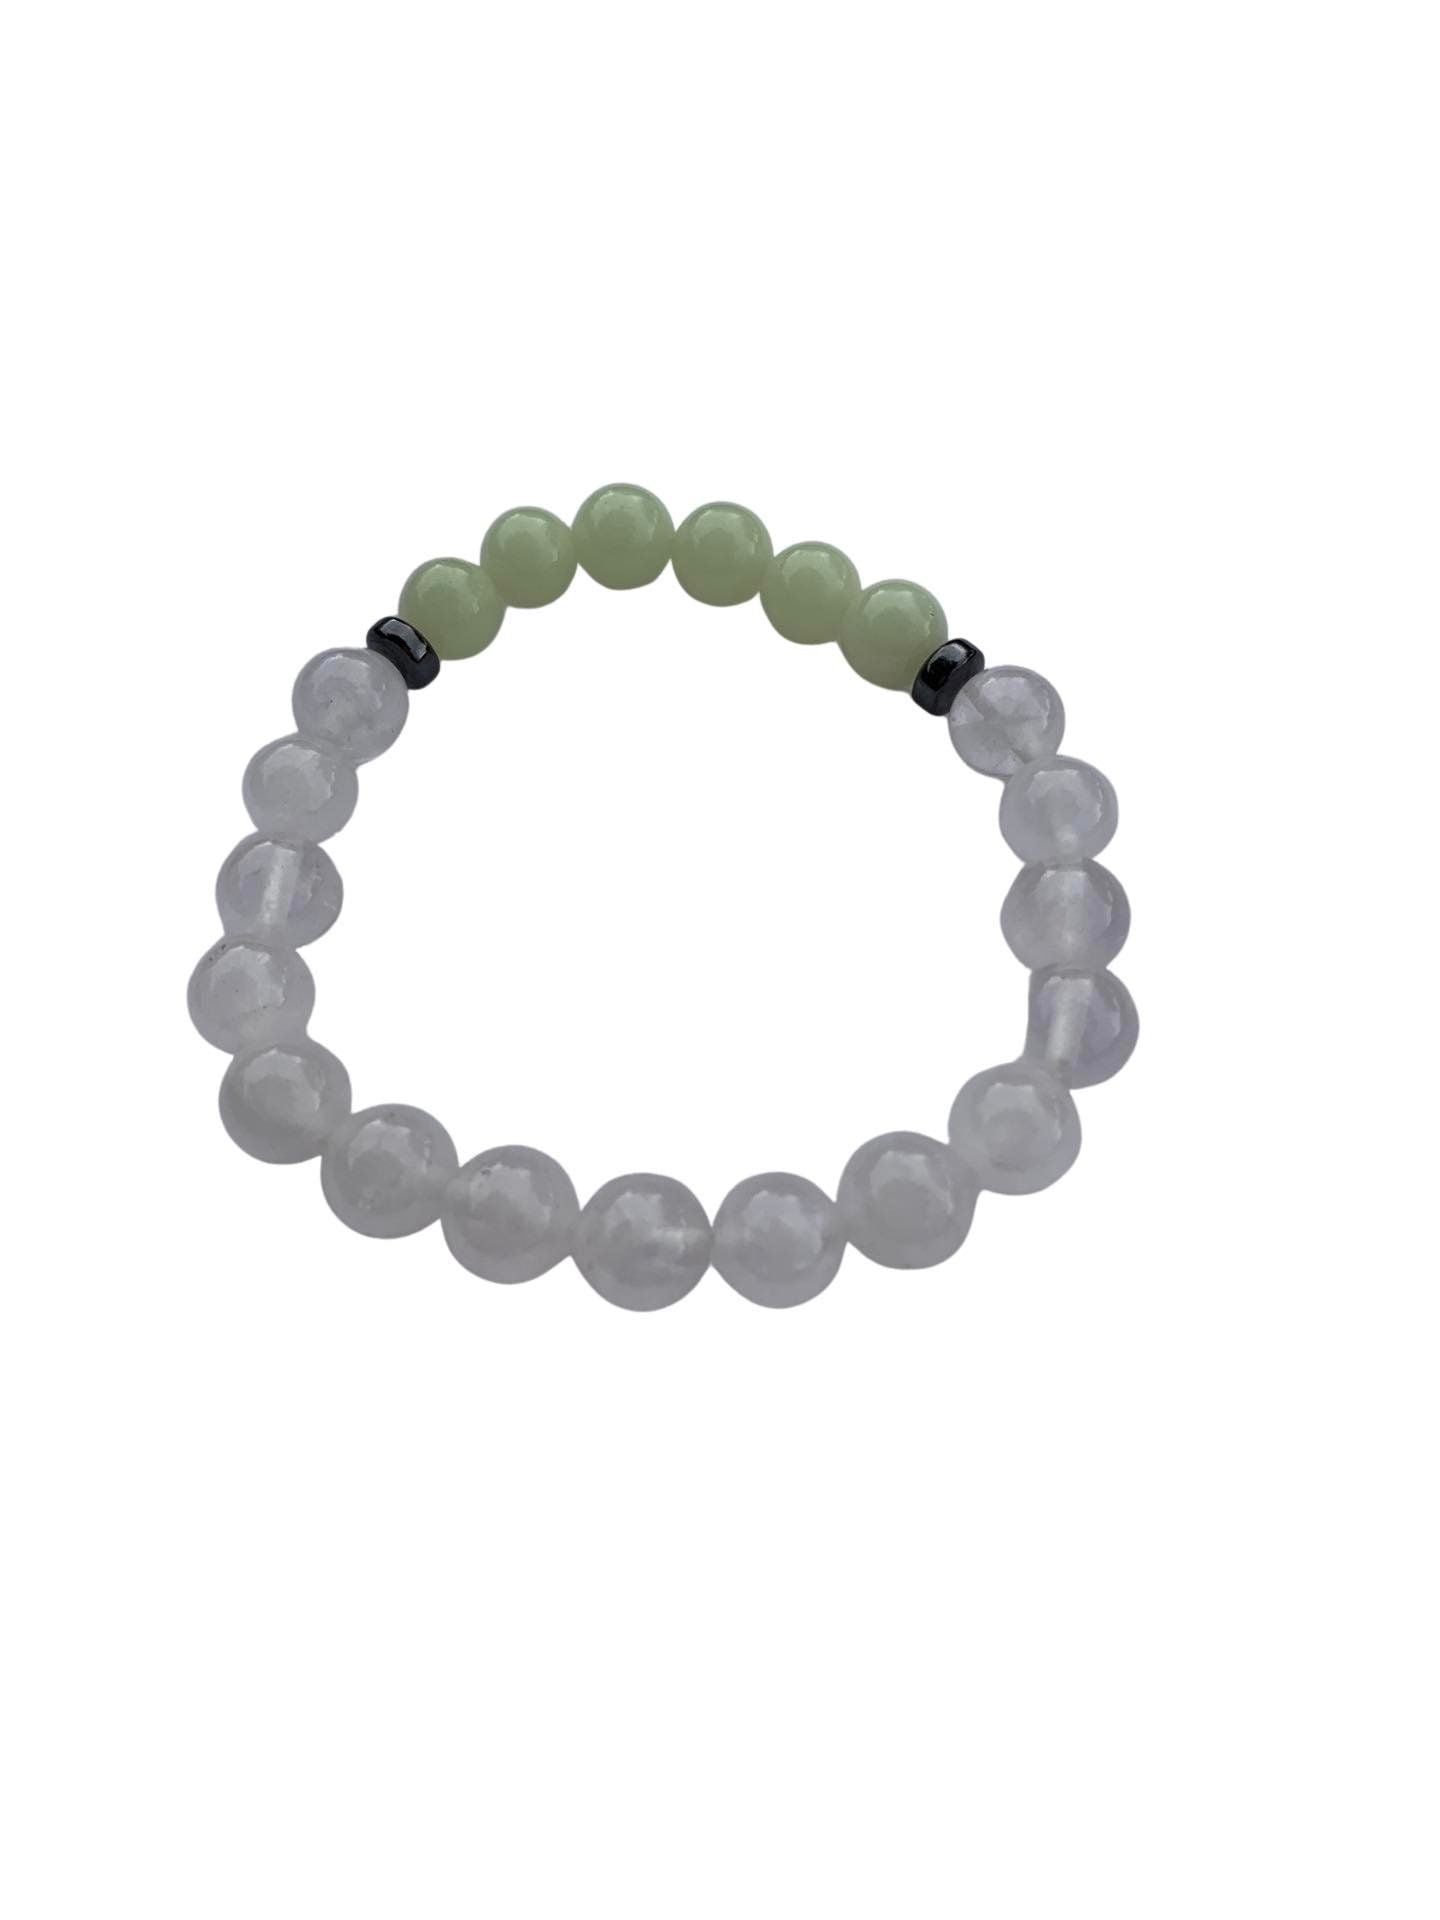 Aragonite Green/Yellow with Clear Quartz Bracelet 8 mm Round Beads - Naturally Glows in the Dark